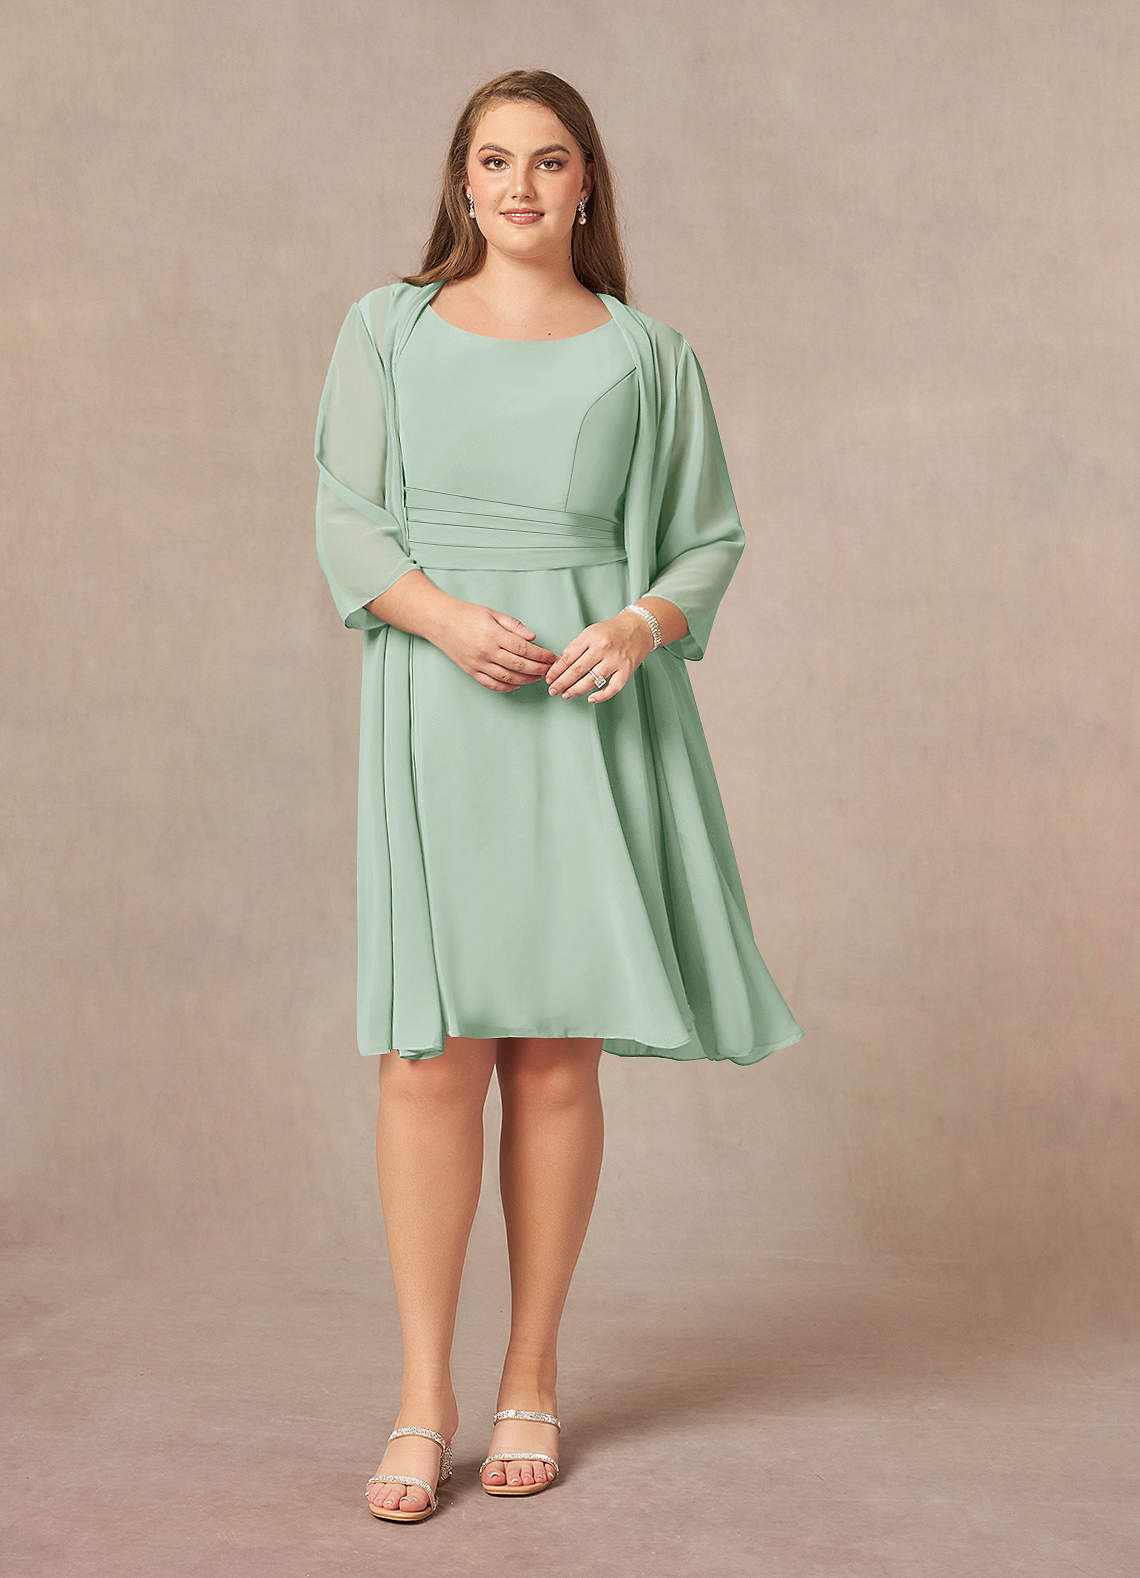 Azazie Shirley Mother of the Bride Dresses A-Line Scoop Pleated Chiffon Knee-Length Dress image1